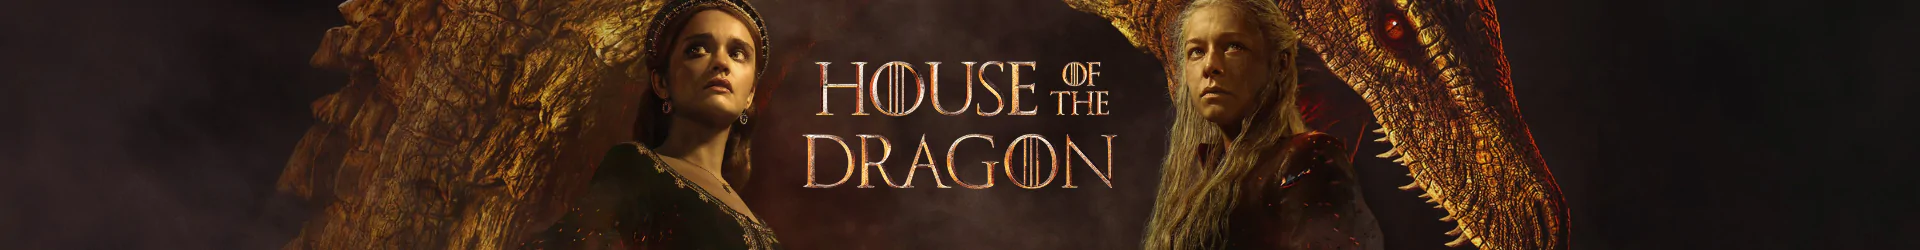 House of the Dragon pullover banner